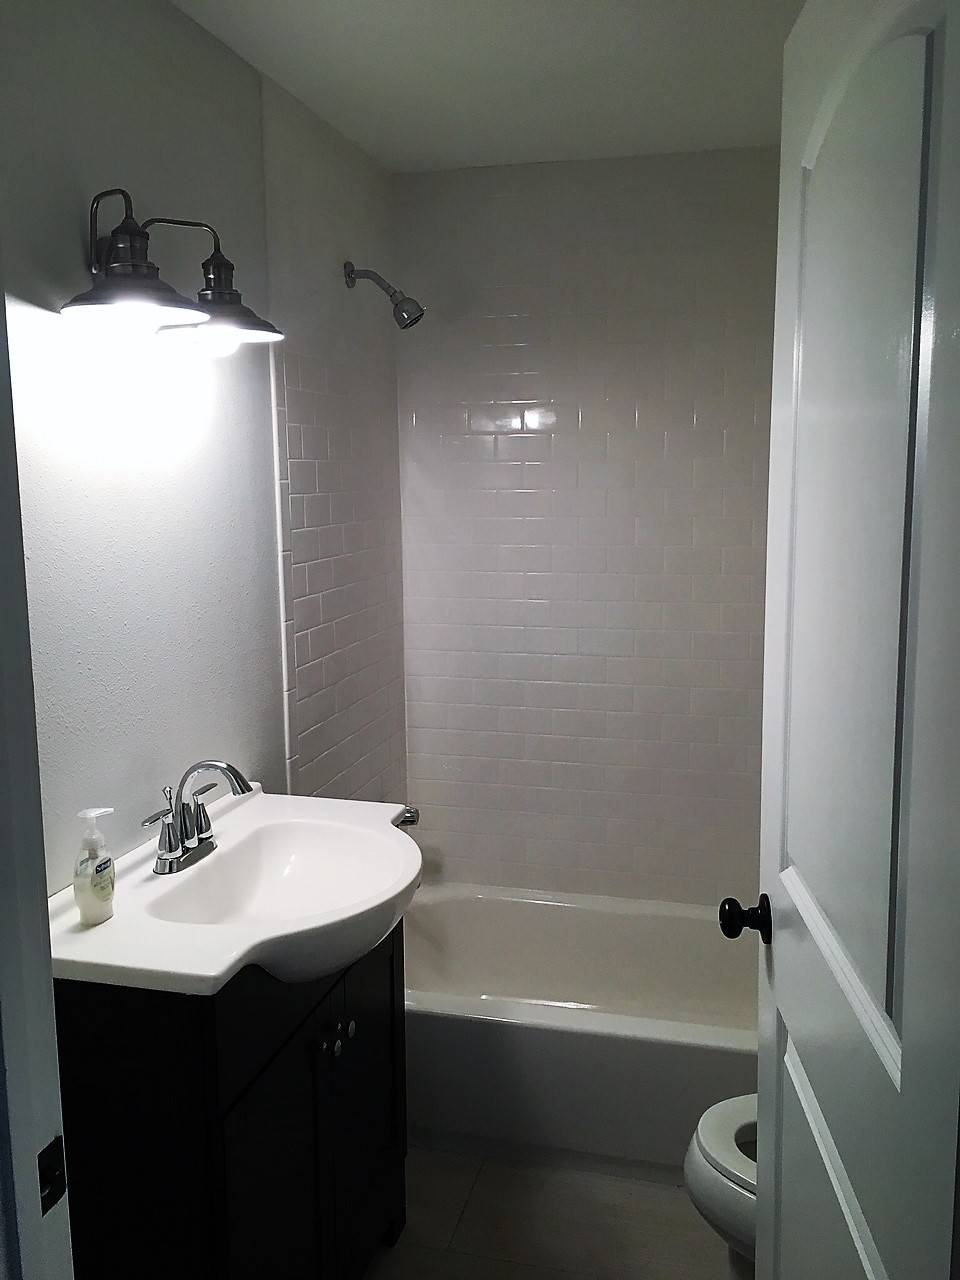 After- the Bathroom